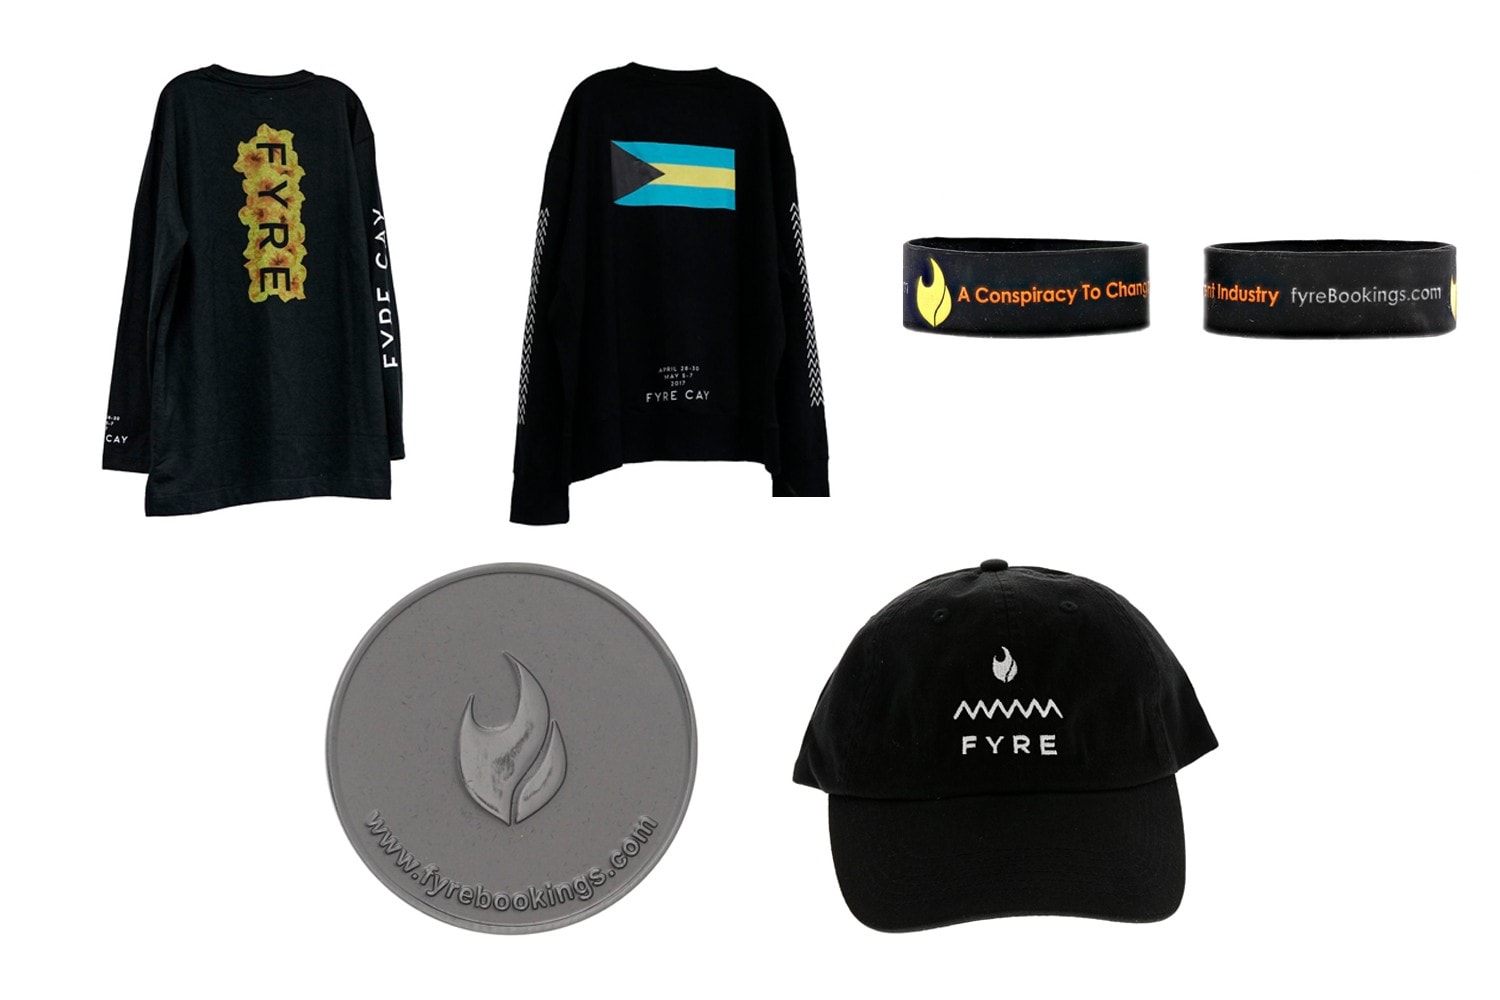 fyre festival merch on sale online auction where to buy us marshals service 